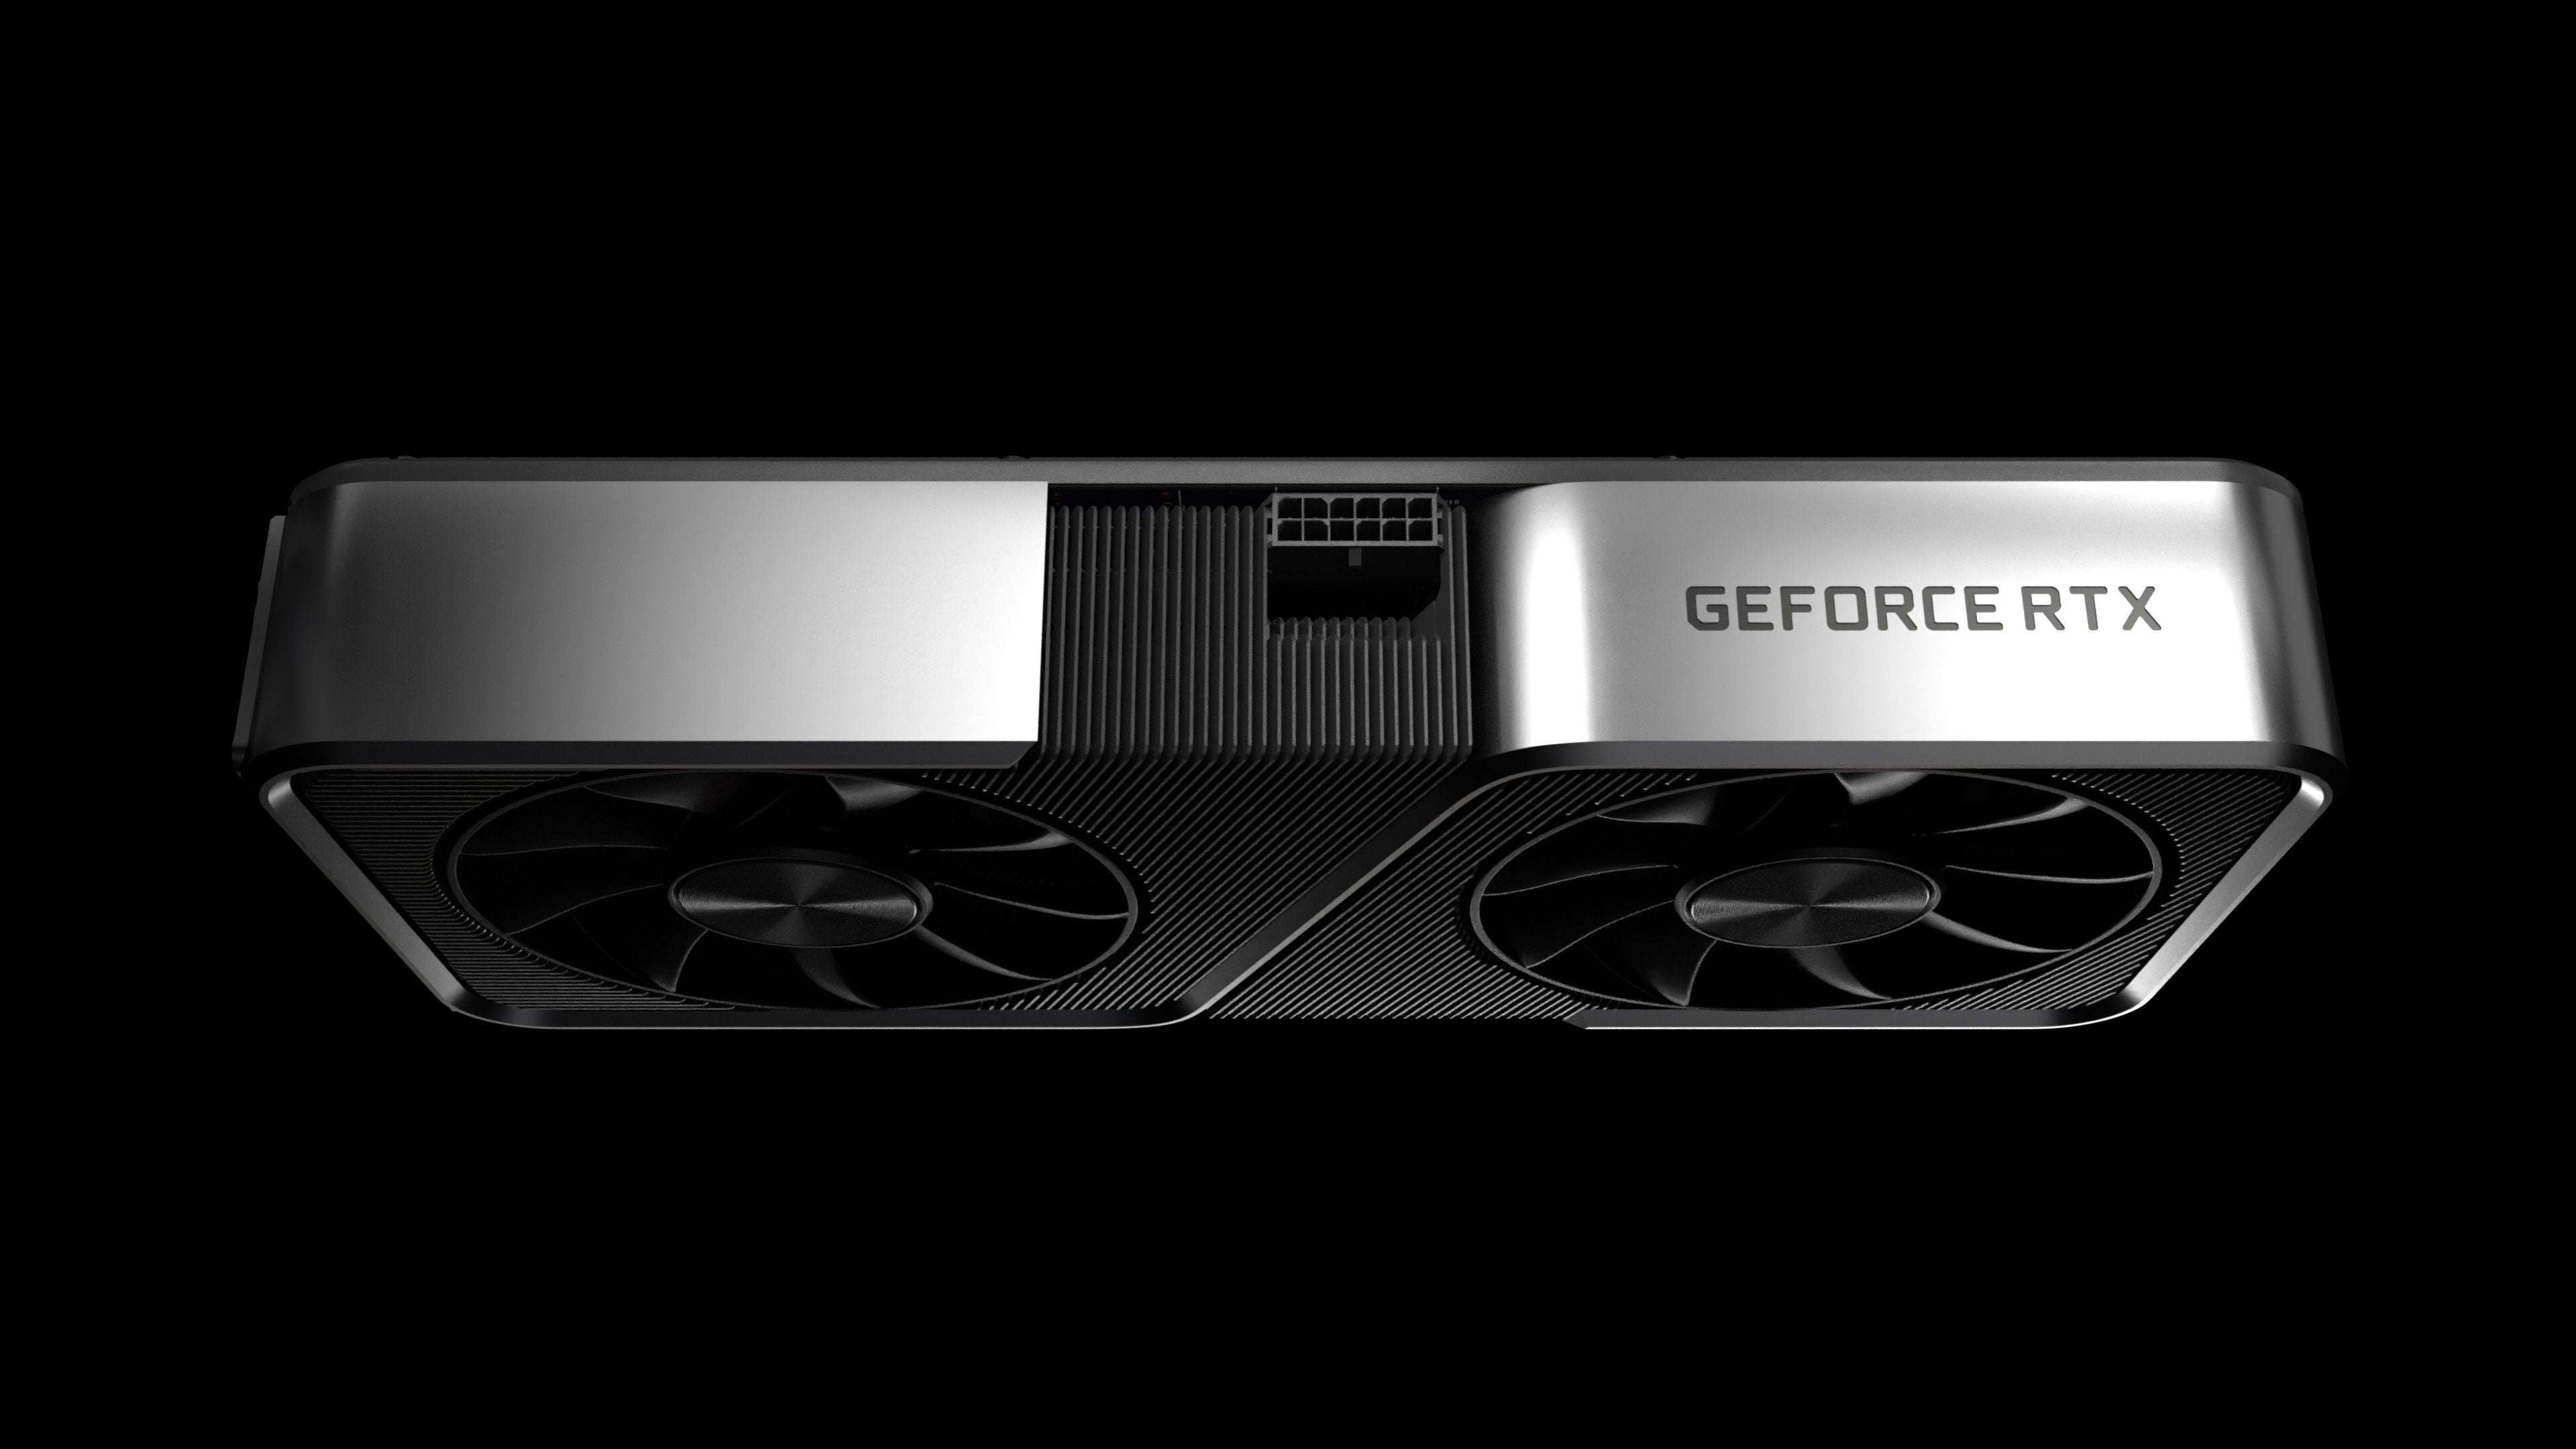 image for NVIDIA GeForce RTX 3070 Ti spotted with 16GB GDDR6 memory